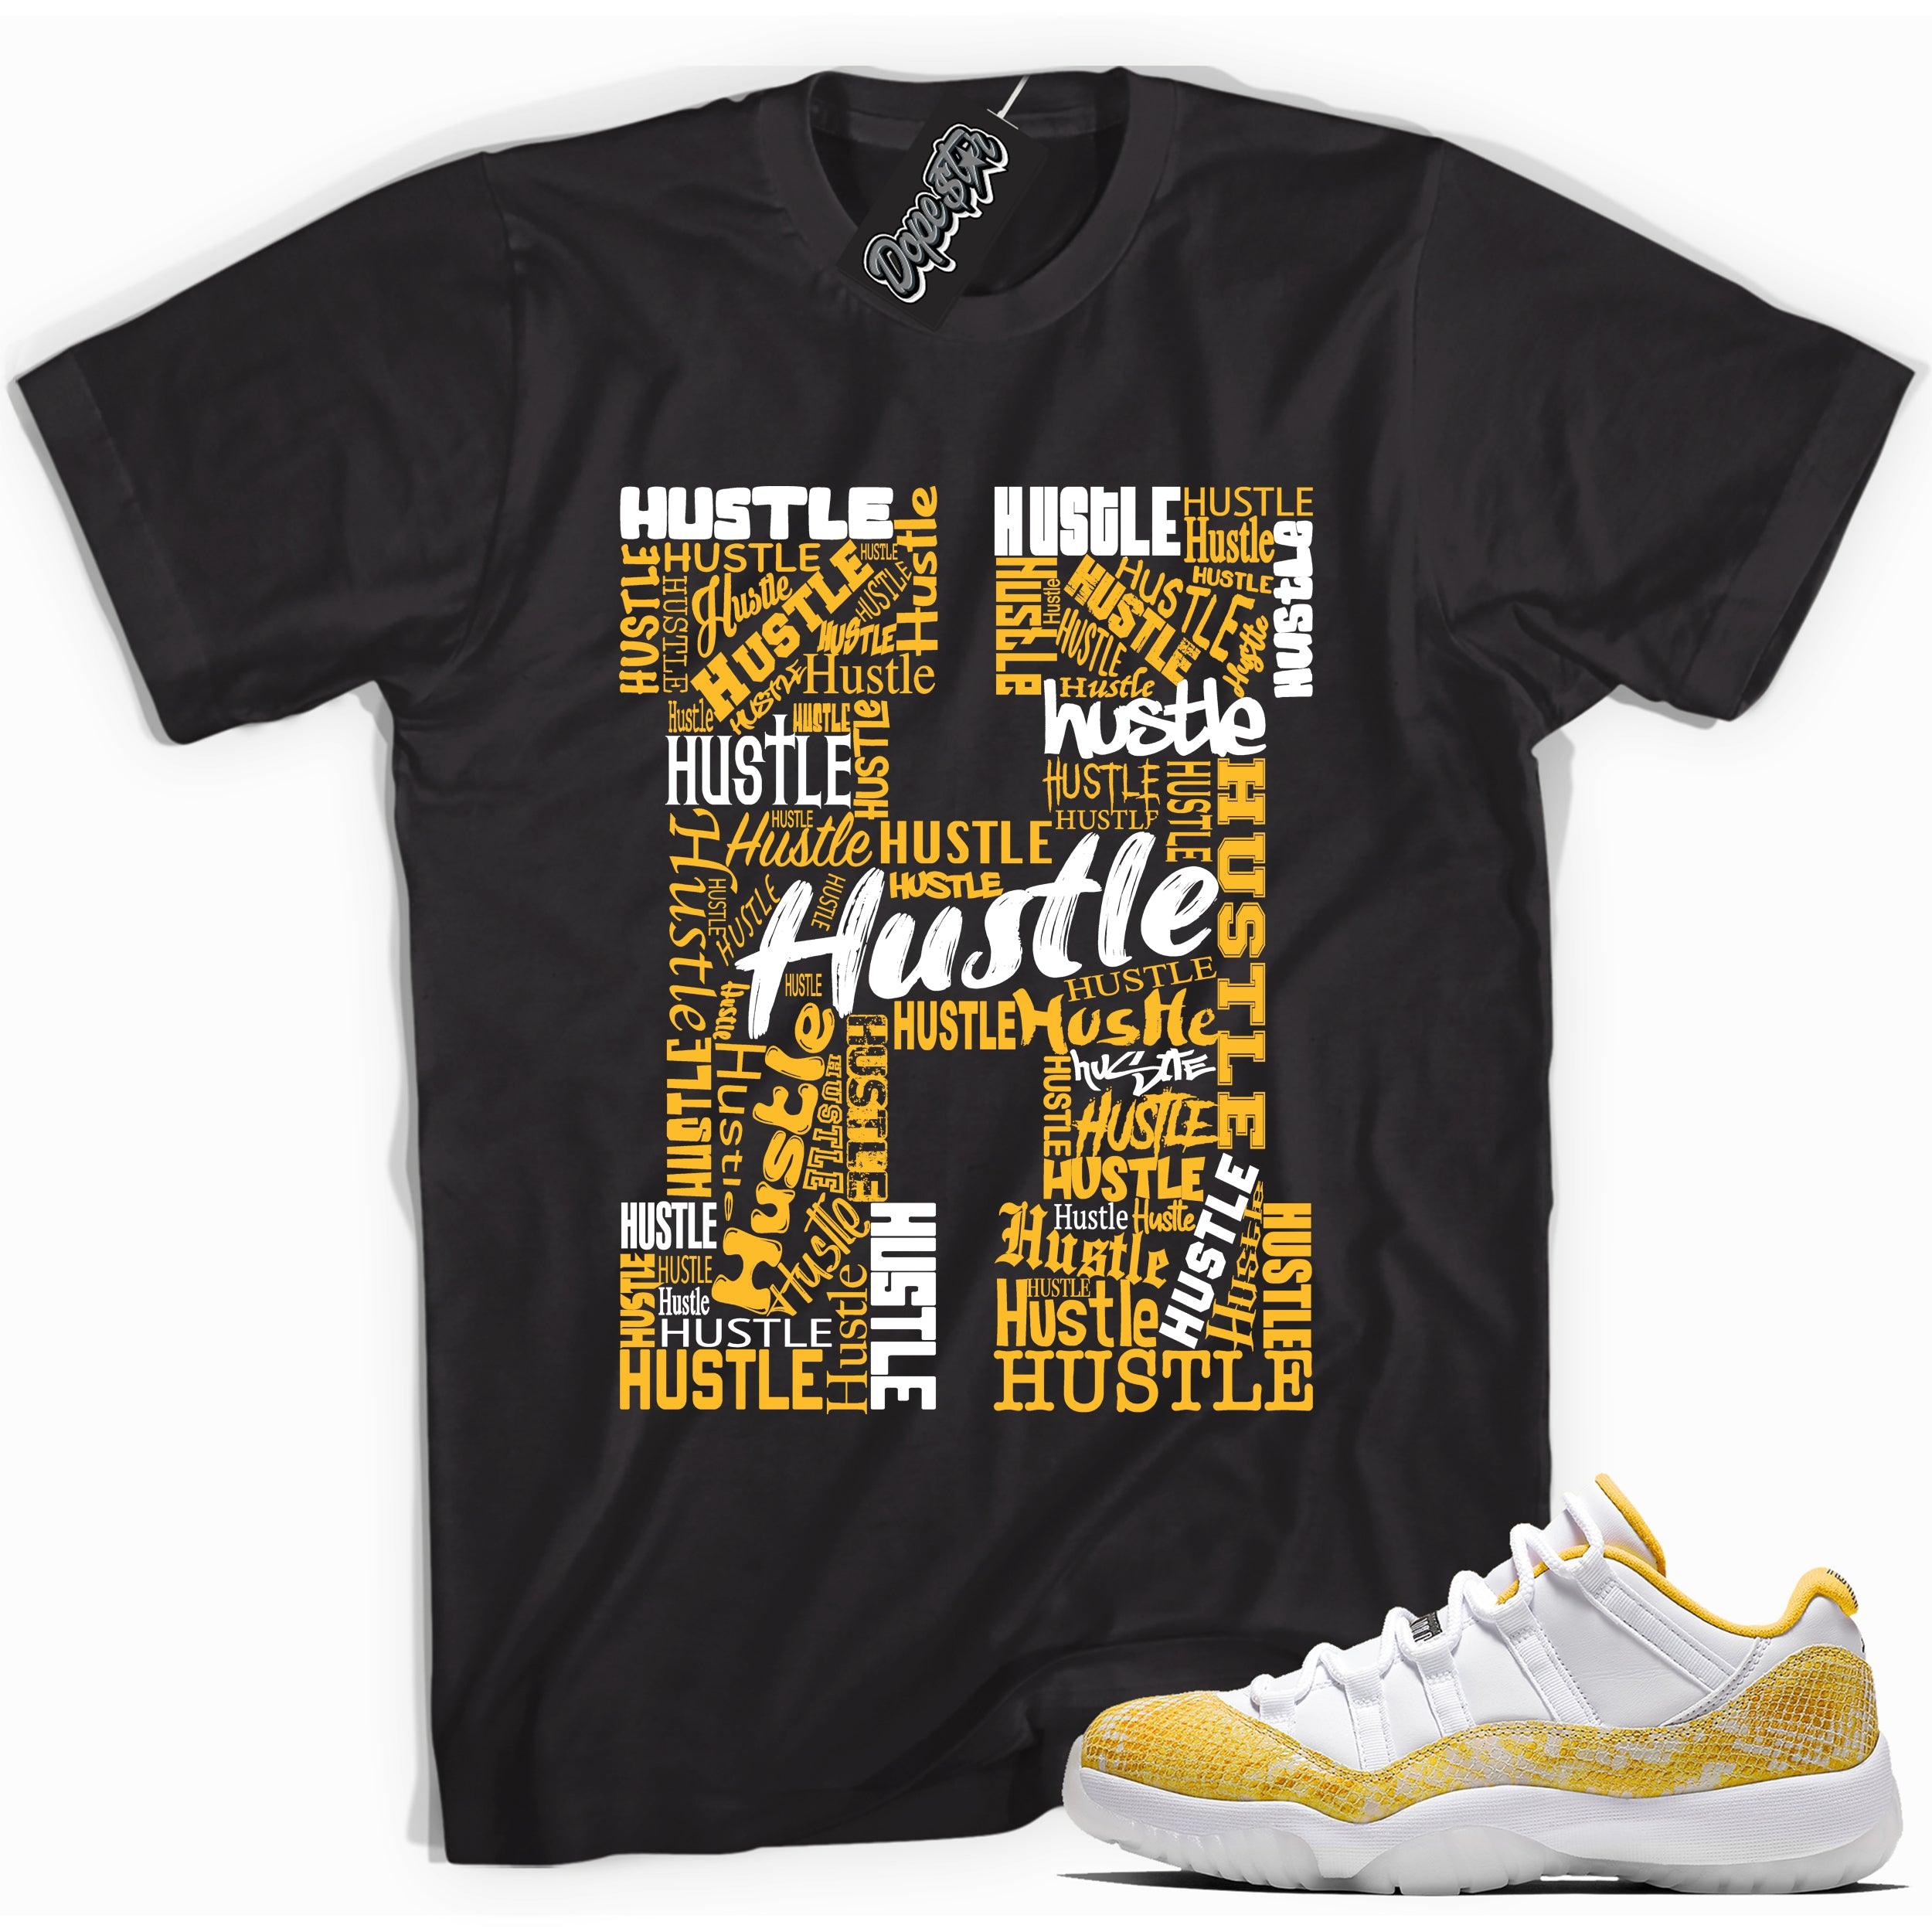 Cool black graphic tee with 'H for hustle' print, that perfectly matches  Air Jordan 11 Retro Low Yellow Snakeskin sneakers